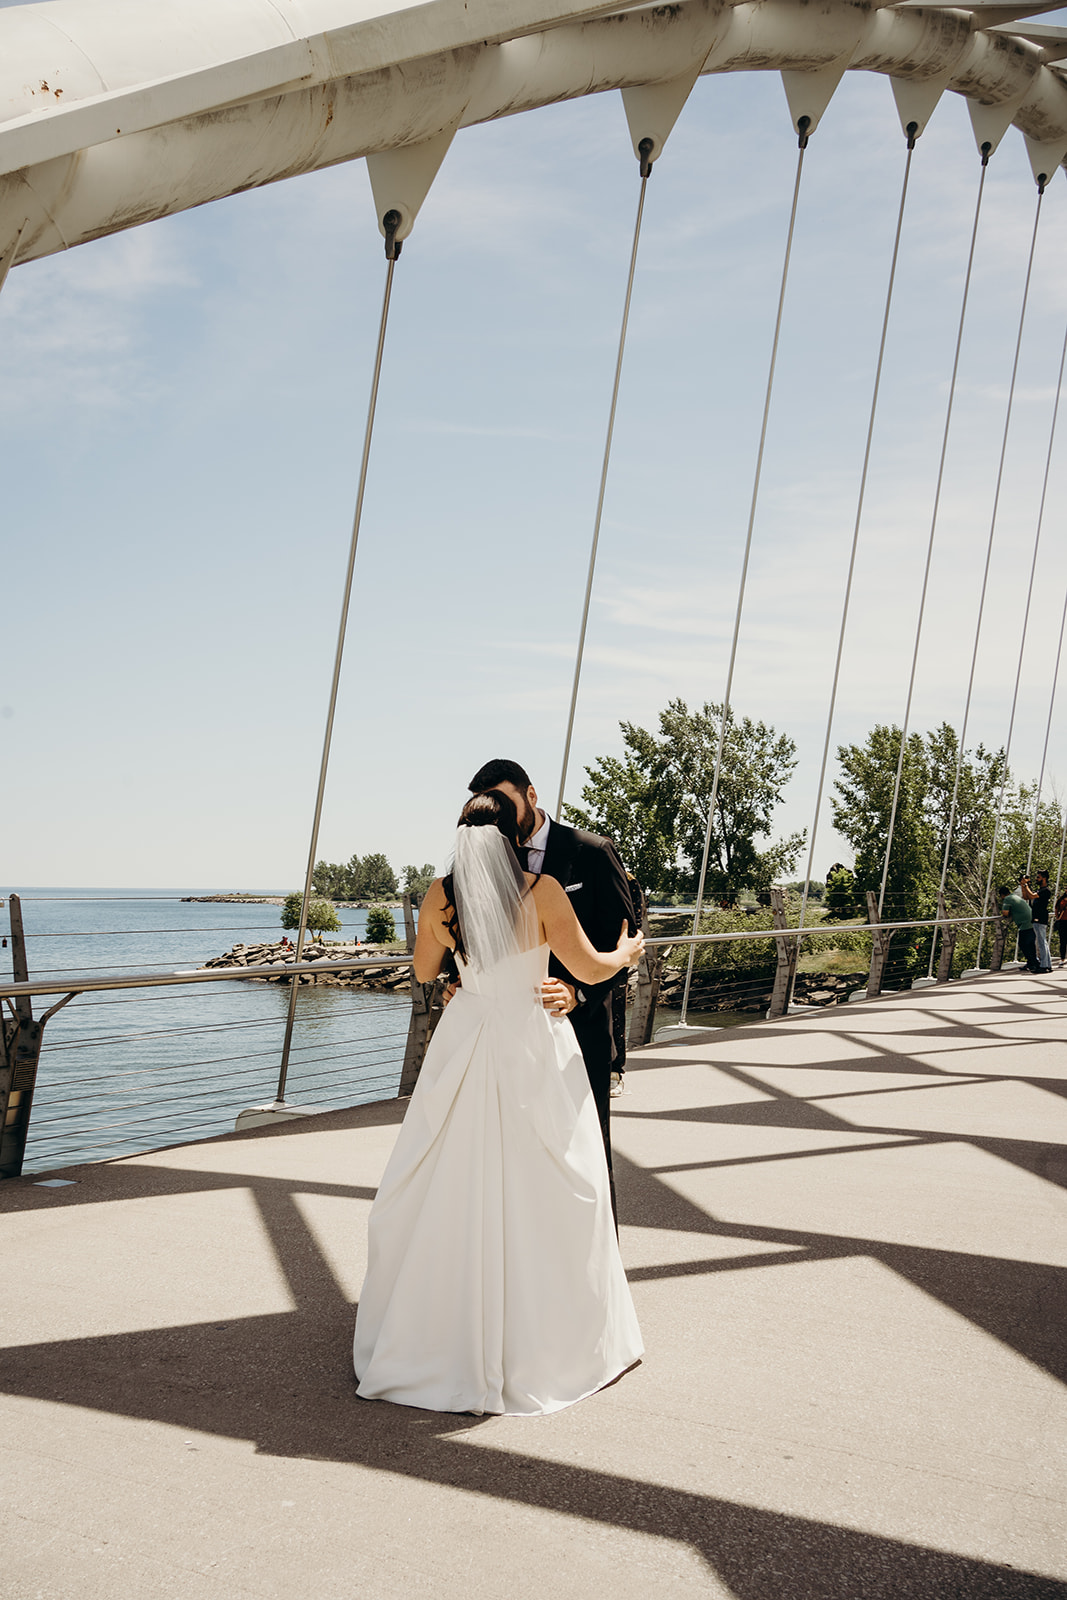 woman facing the man on a bridge by the lake outside.